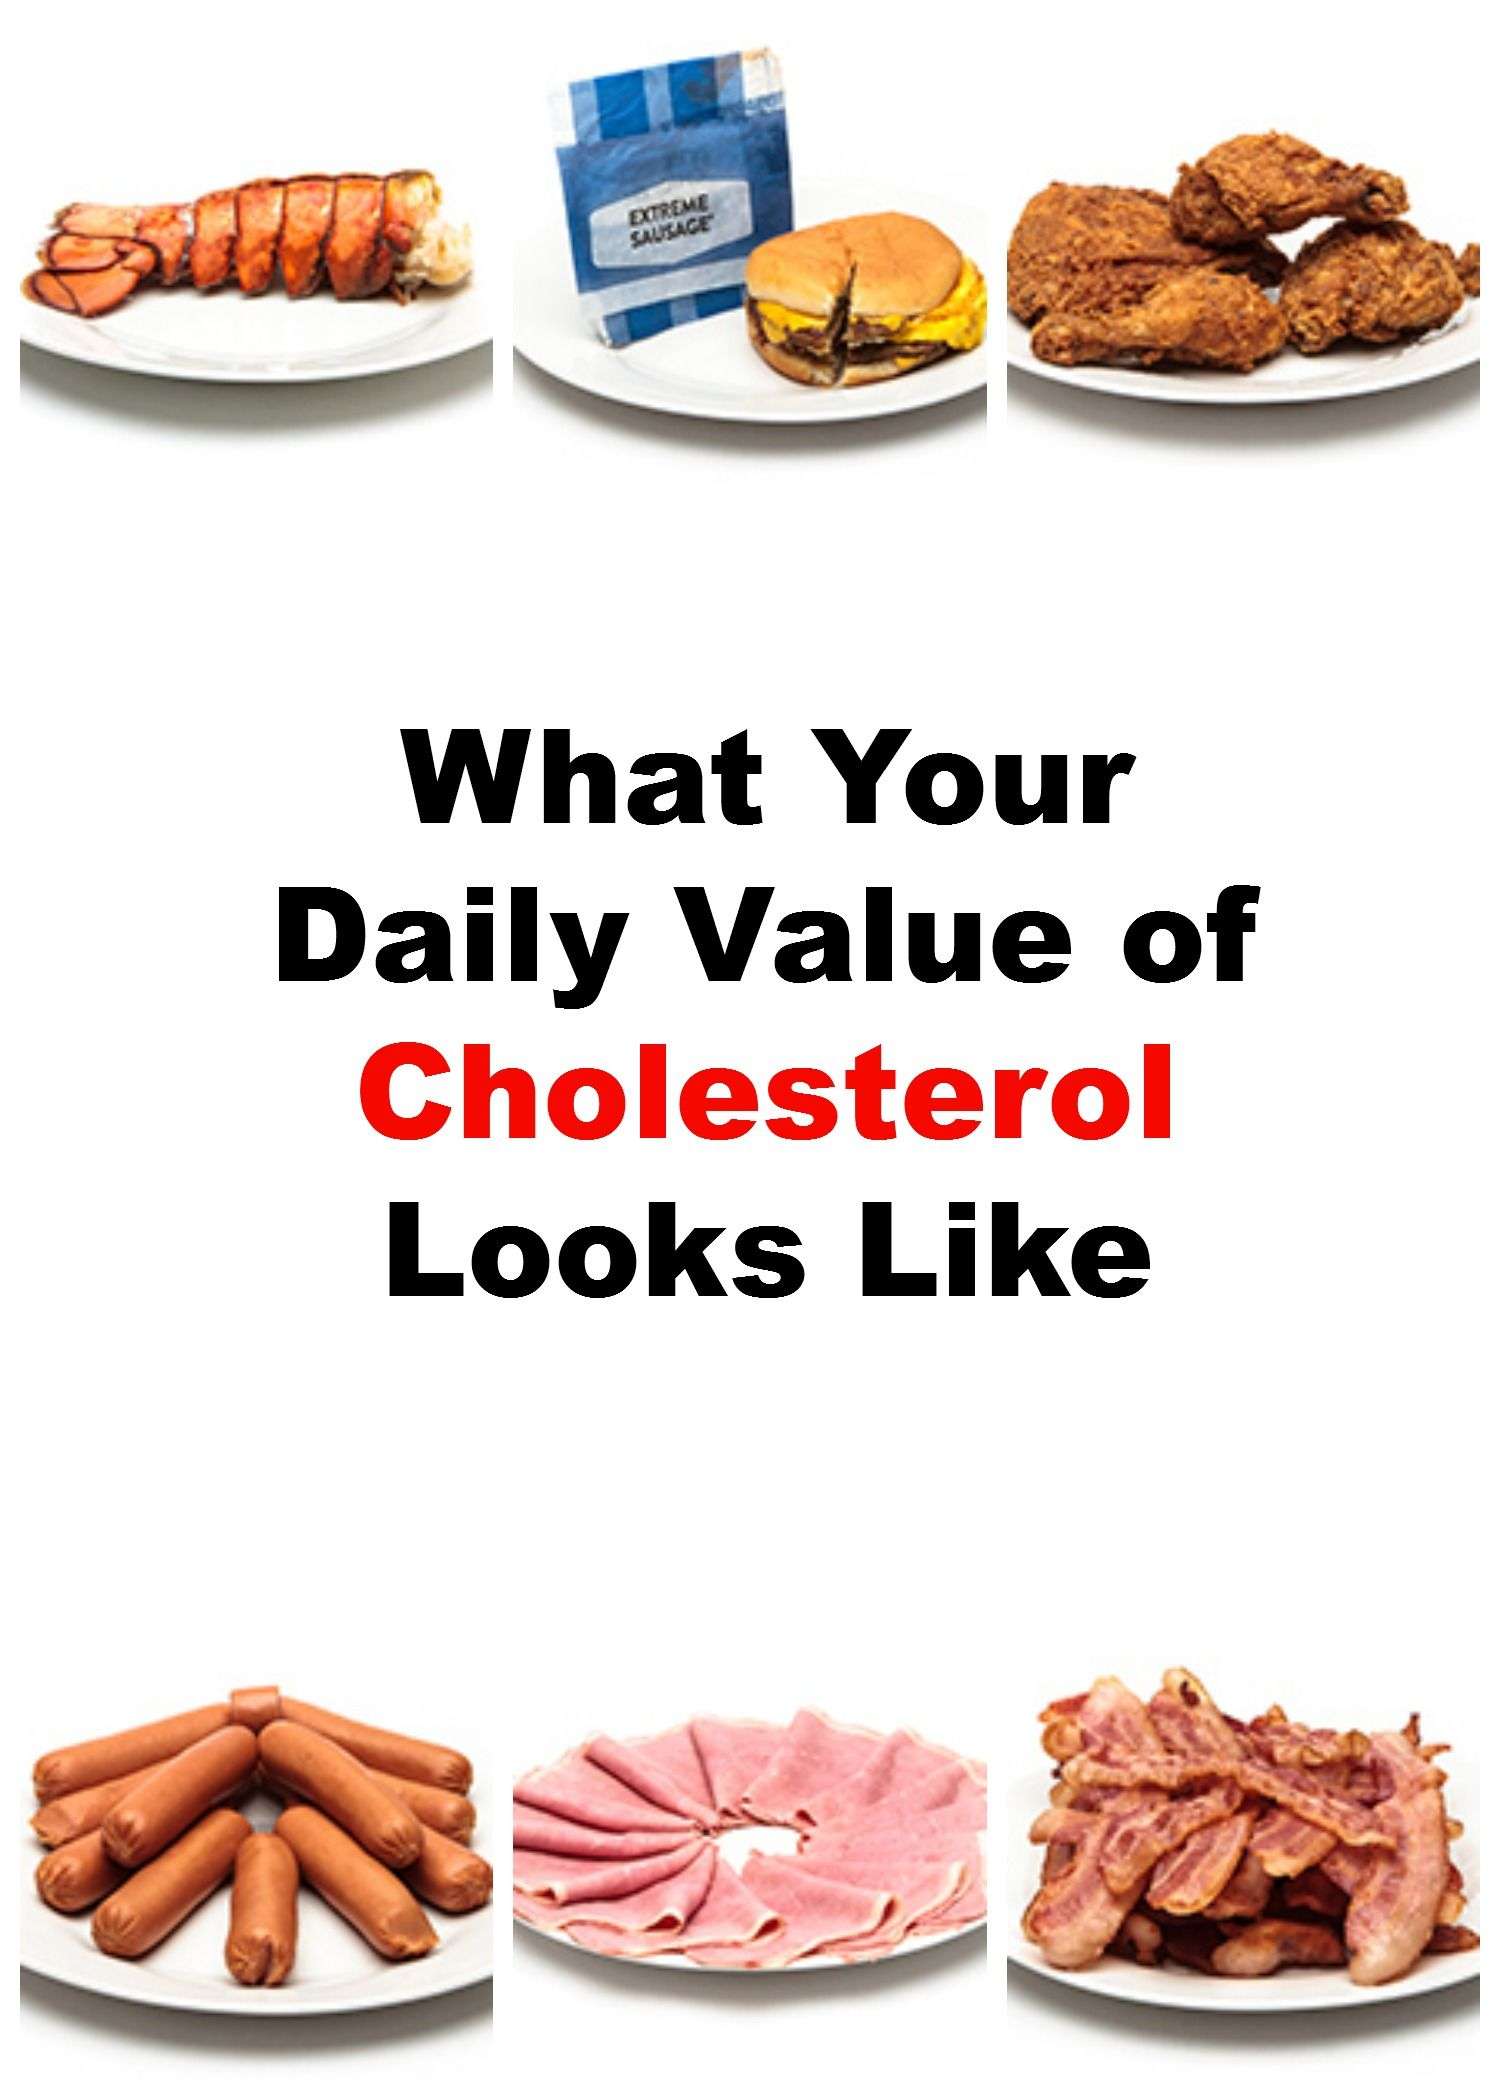 What Does 100% of Your Daily Value of Cholesterol Look Like?